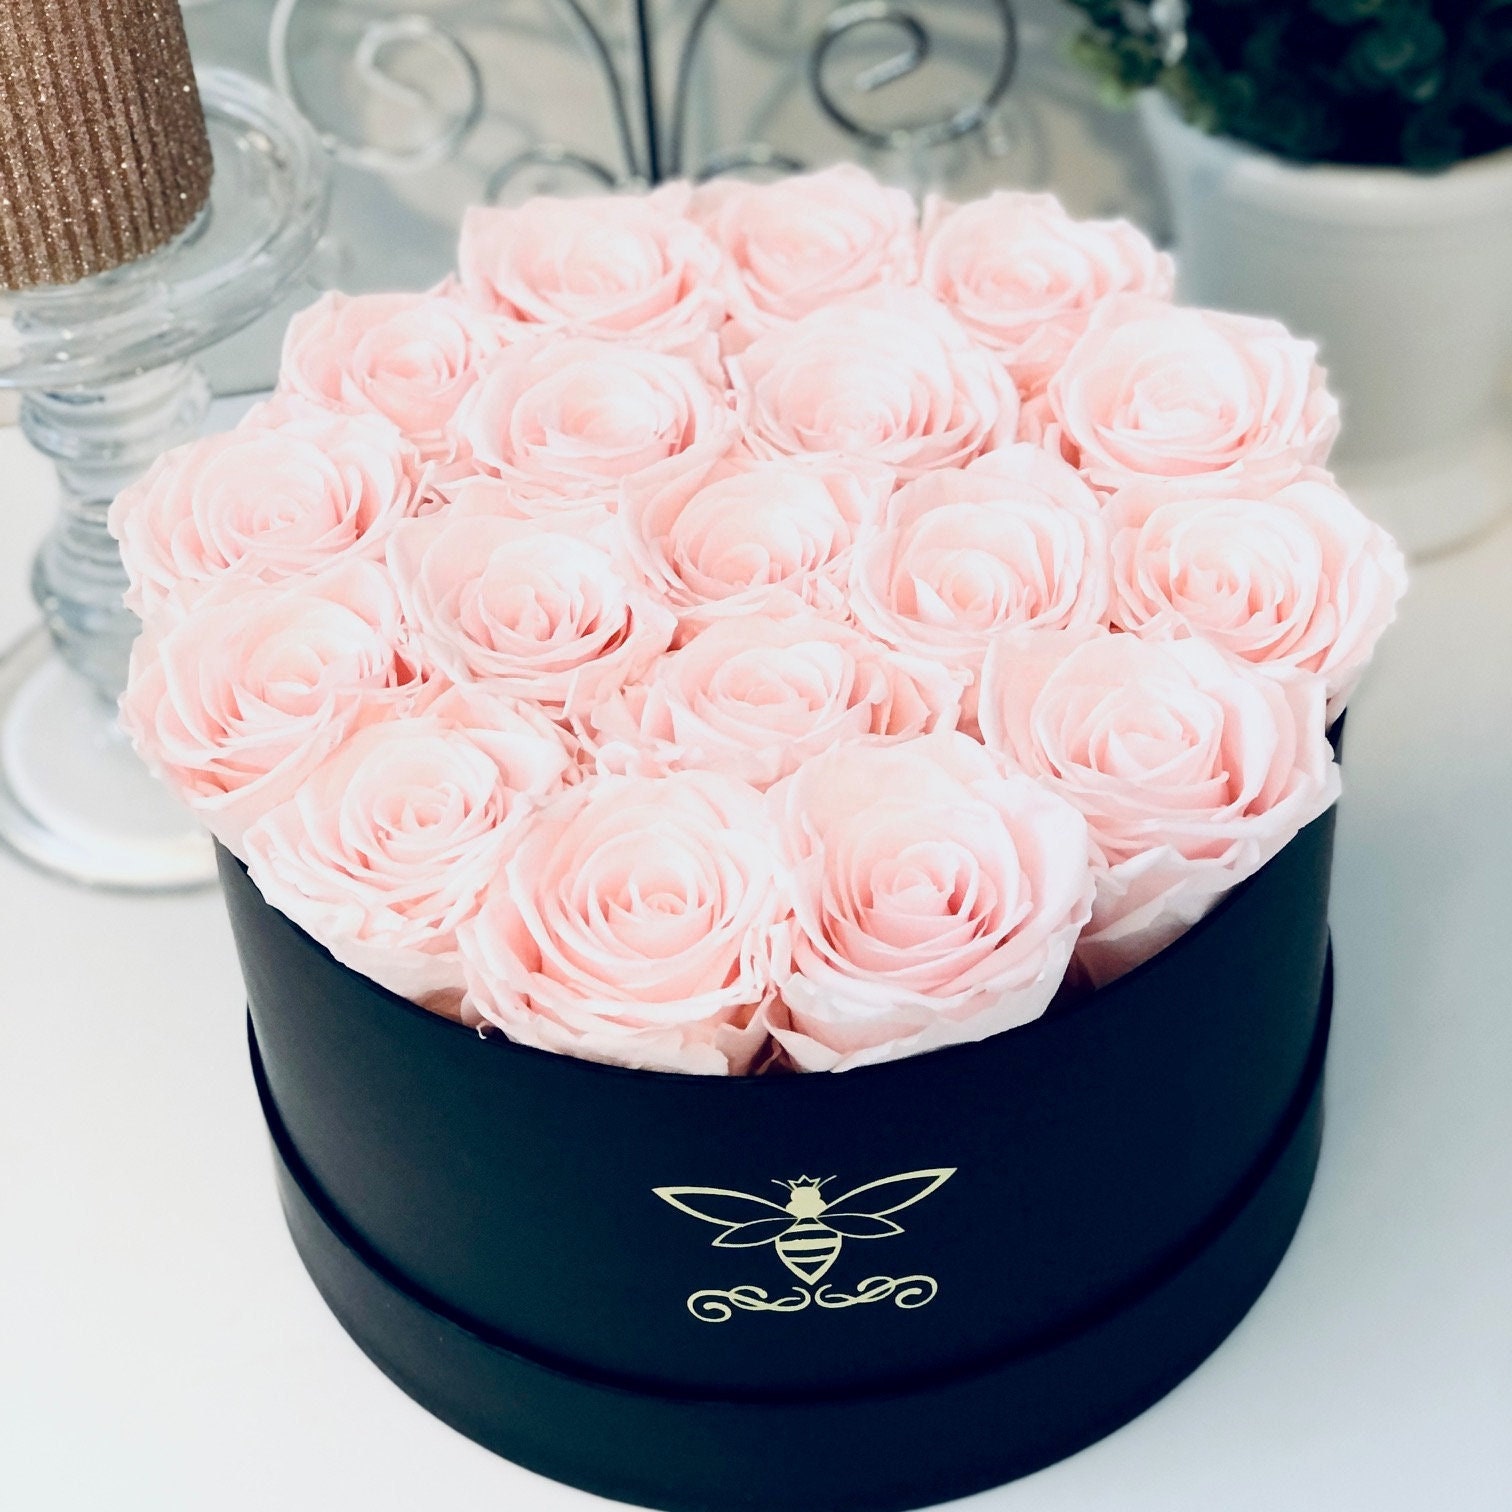 Preserved Roses That Last Over One Year, Black Personalized Rose Box,  Anniversary Flower Gifts for Her, Gift for Mom, Mother's Day Gift 